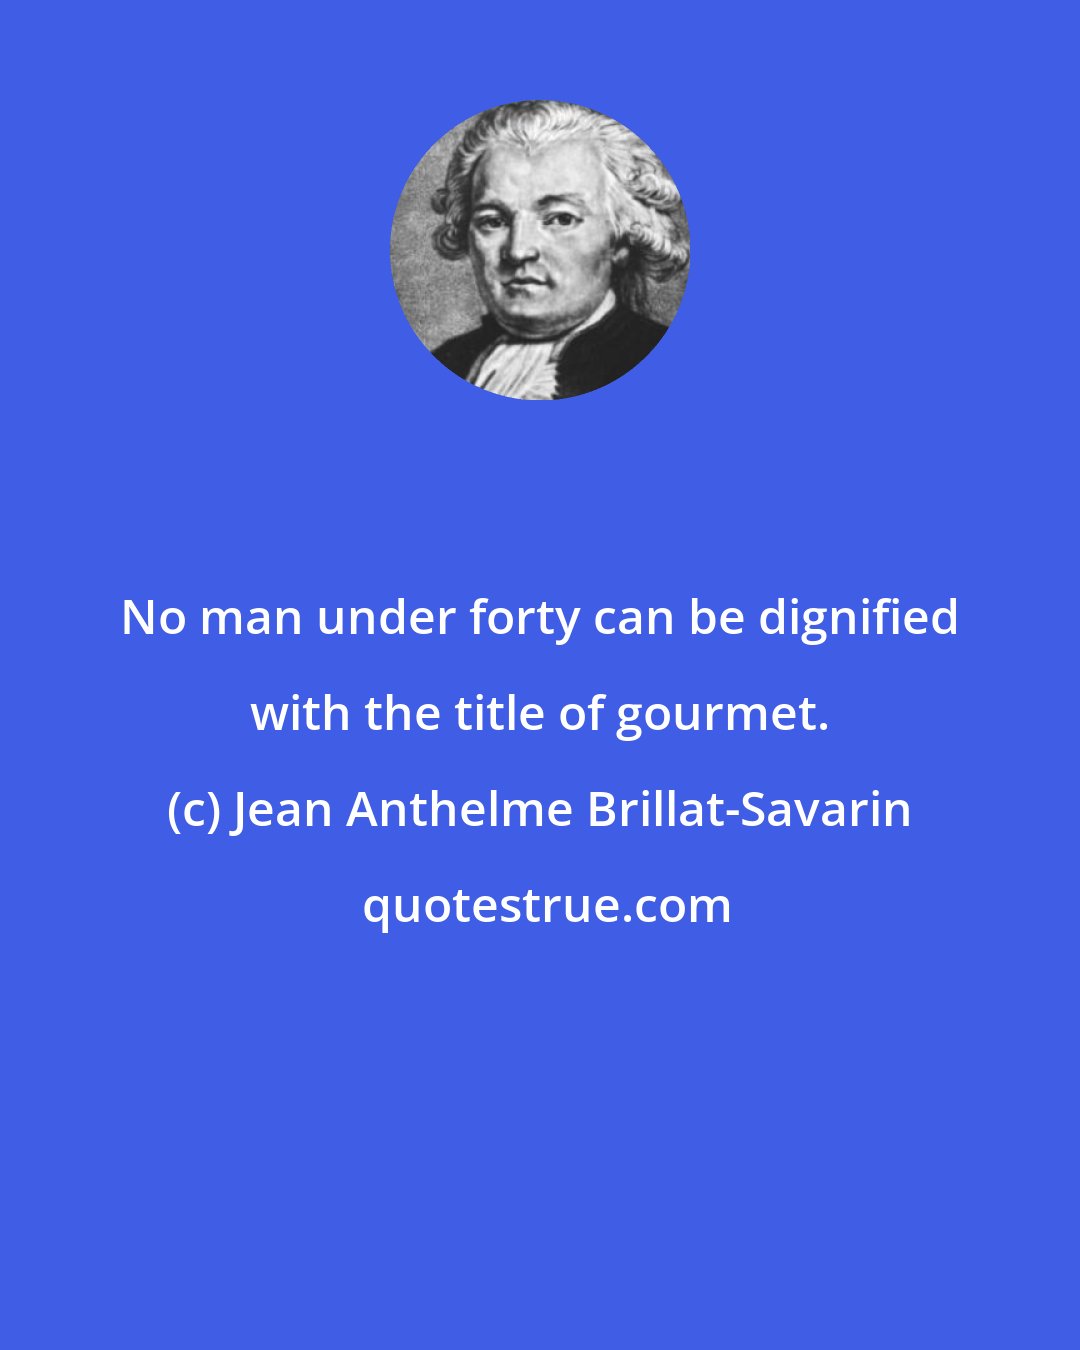 Jean Anthelme Brillat-Savarin: No man under forty can be dignified with the title of gourmet.